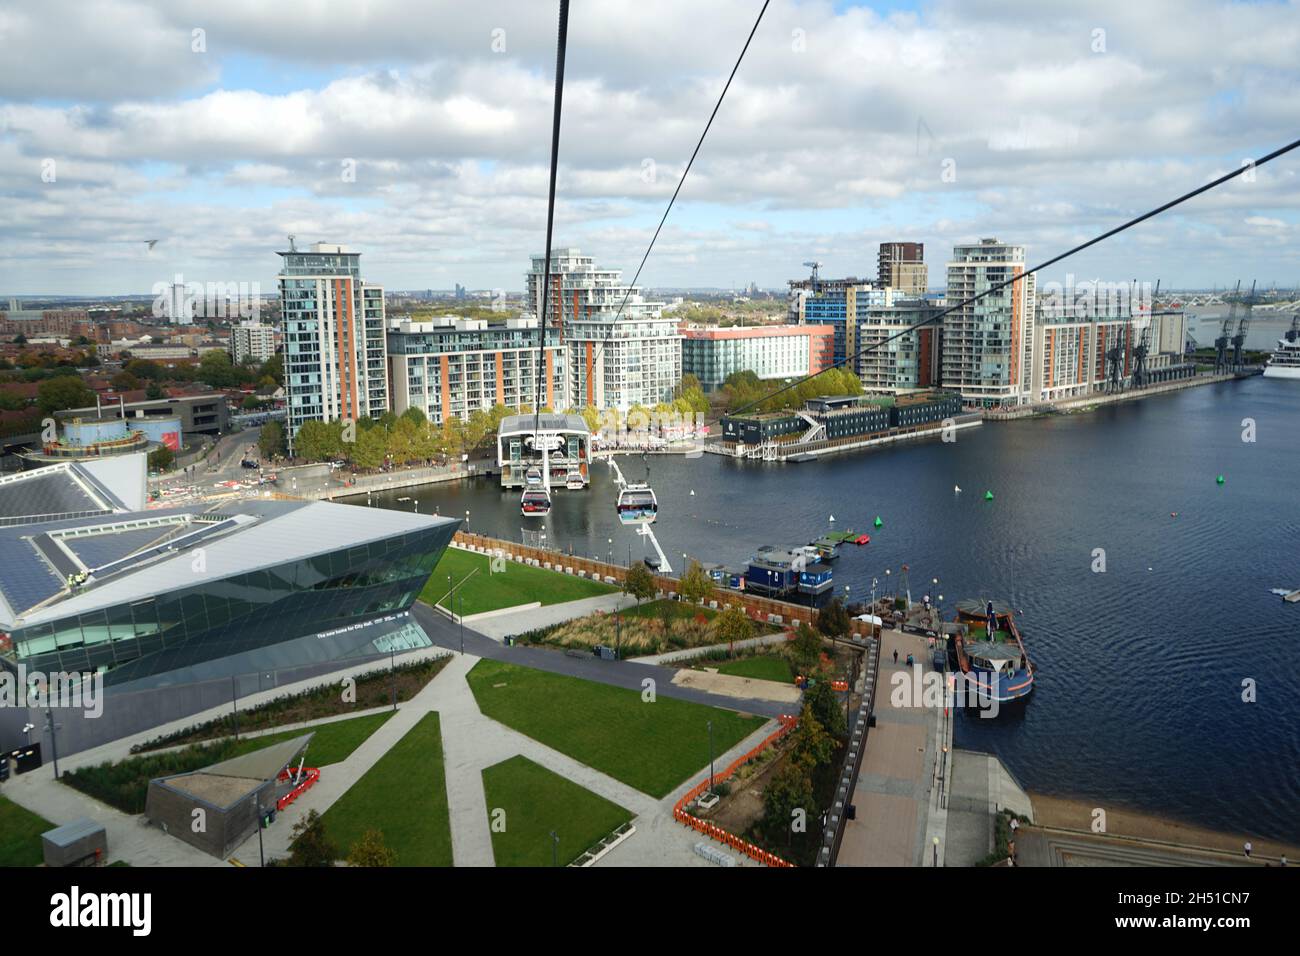 An aerial view from the Emirates Cable Cars approaching the Royal Dock over London River Thames in he U.K Stock Photo